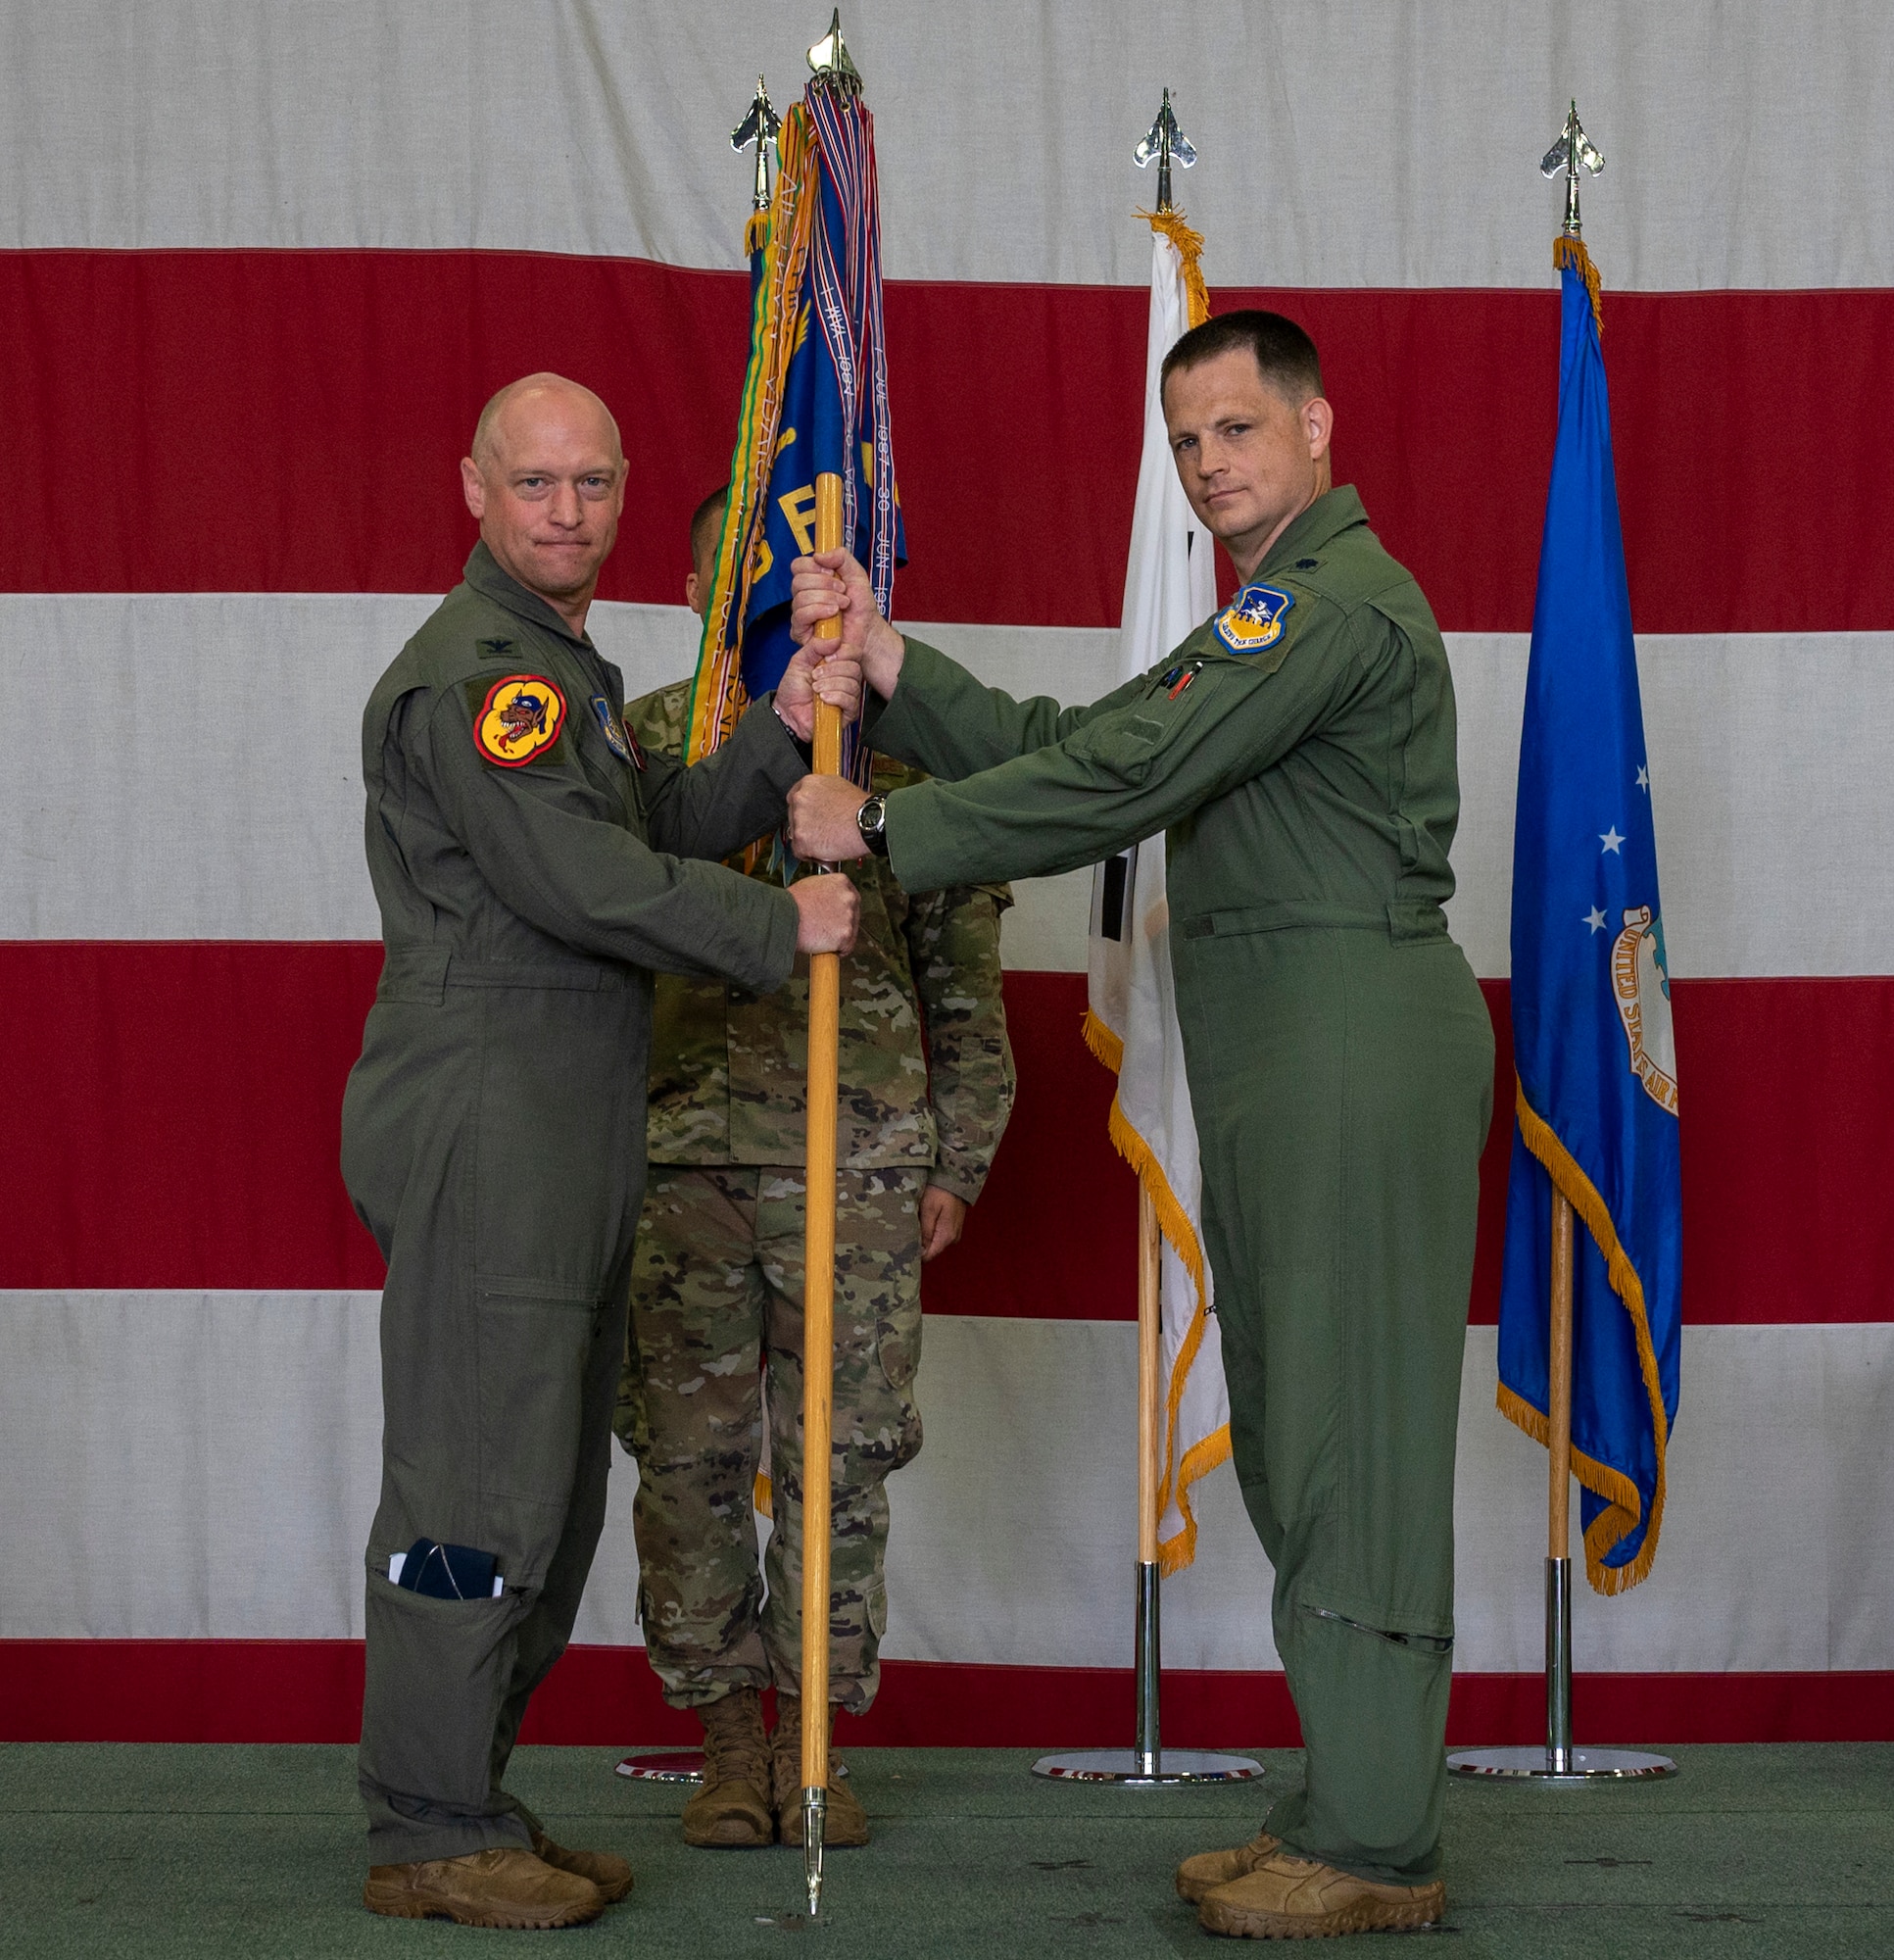 Col. Mathew Gaetke, 51st Operations Group commander, left, passes the squadron guidon to Lt. Col. Cory Farrer, 36th Fighter Squadron incoming commander, as a symbol of his taking command of the 36th FS at Osan Air Base, Republic of Korea, June 30, 2022.